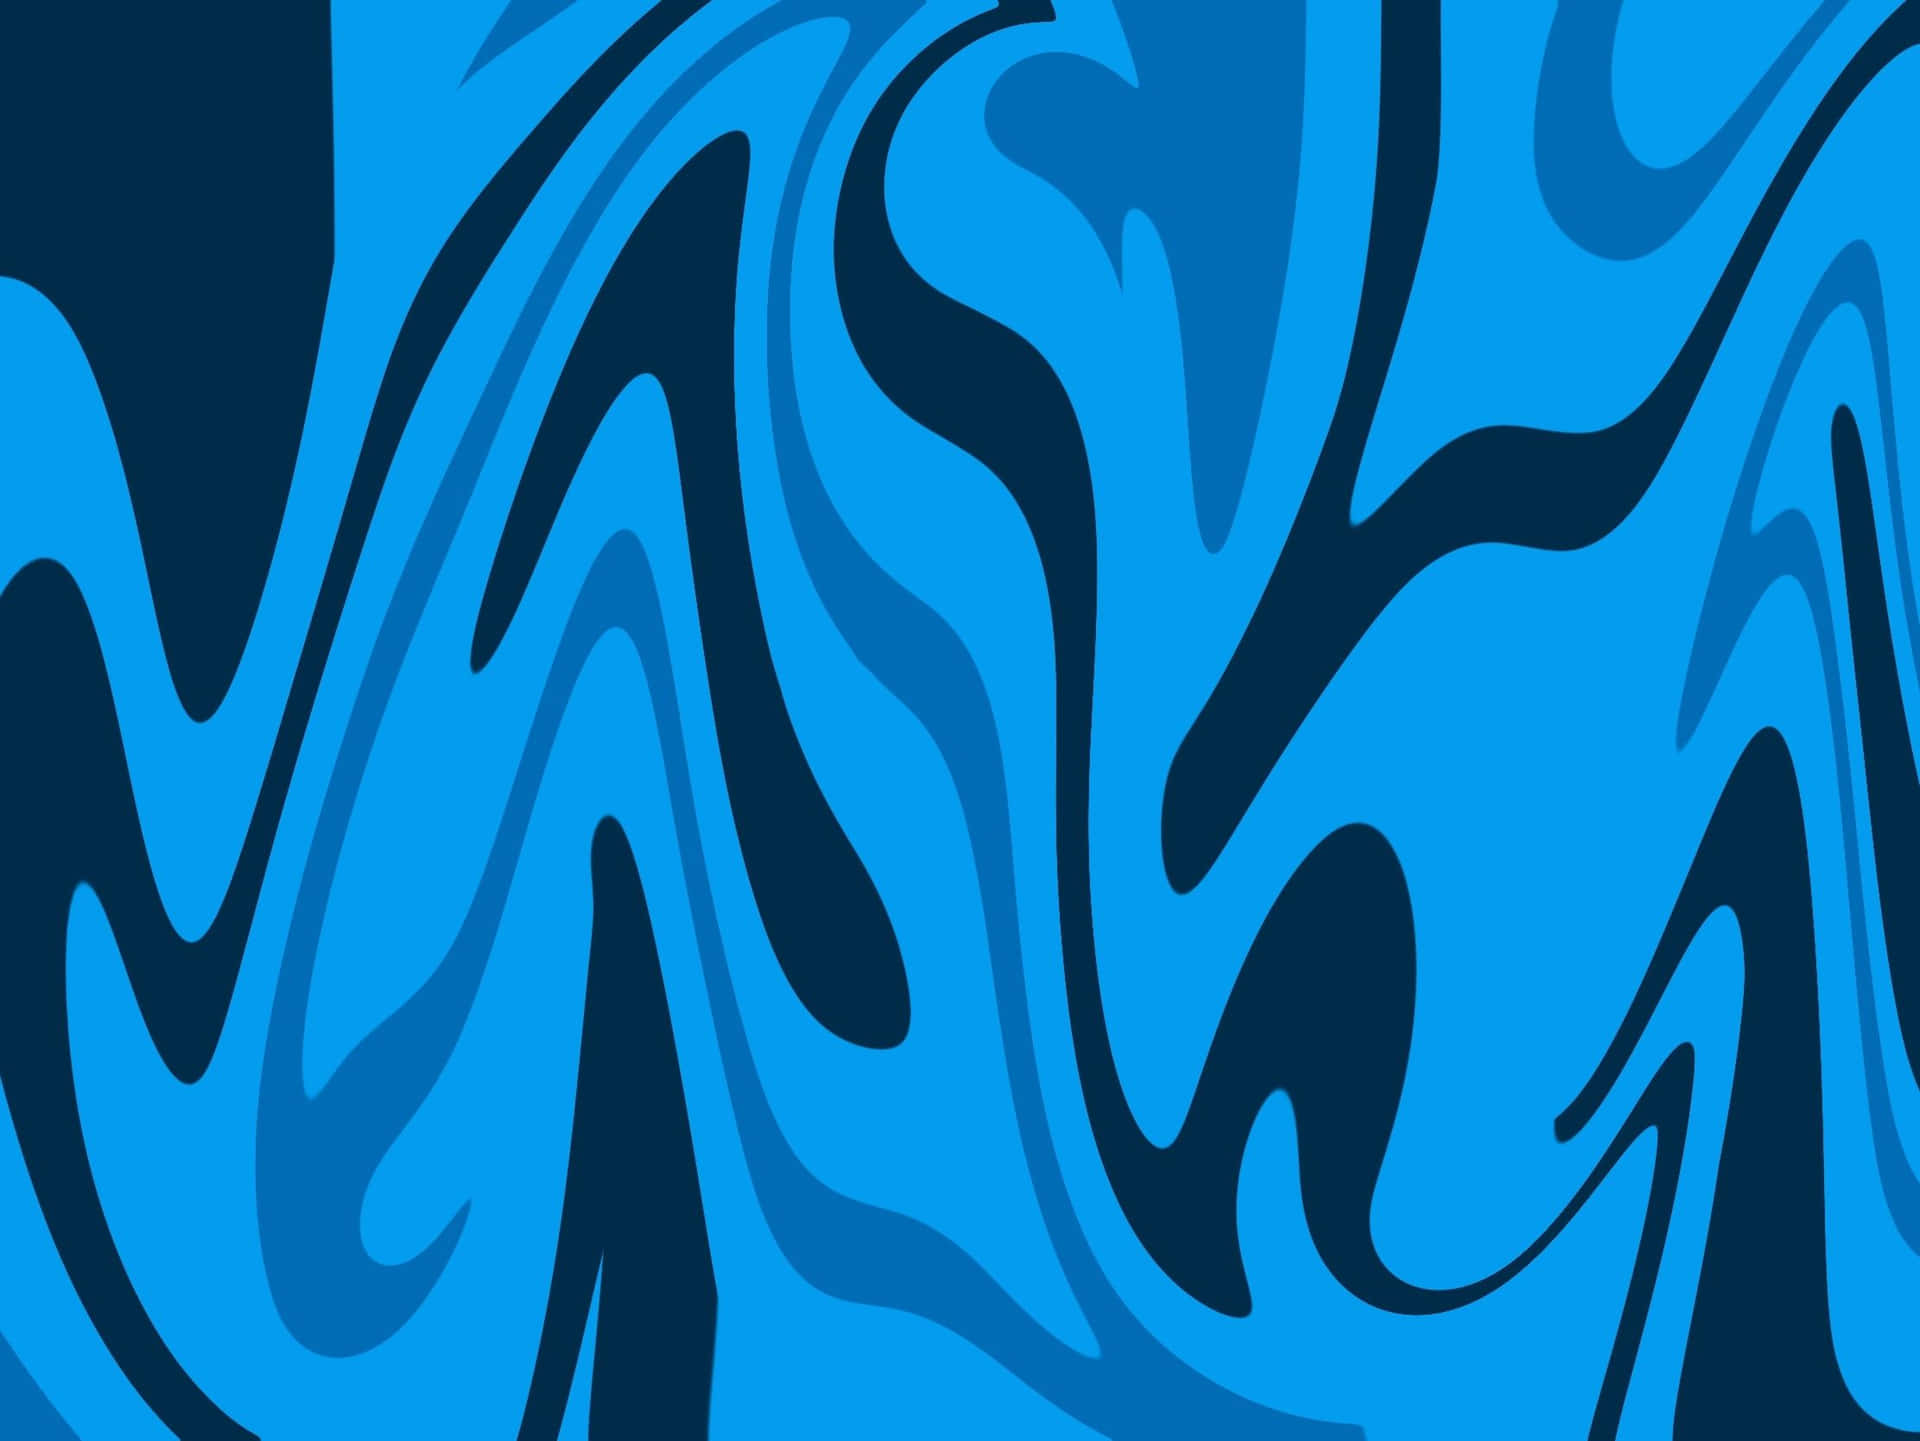 A Blue And Black Abstract Pattern With Swirls Wallpaper